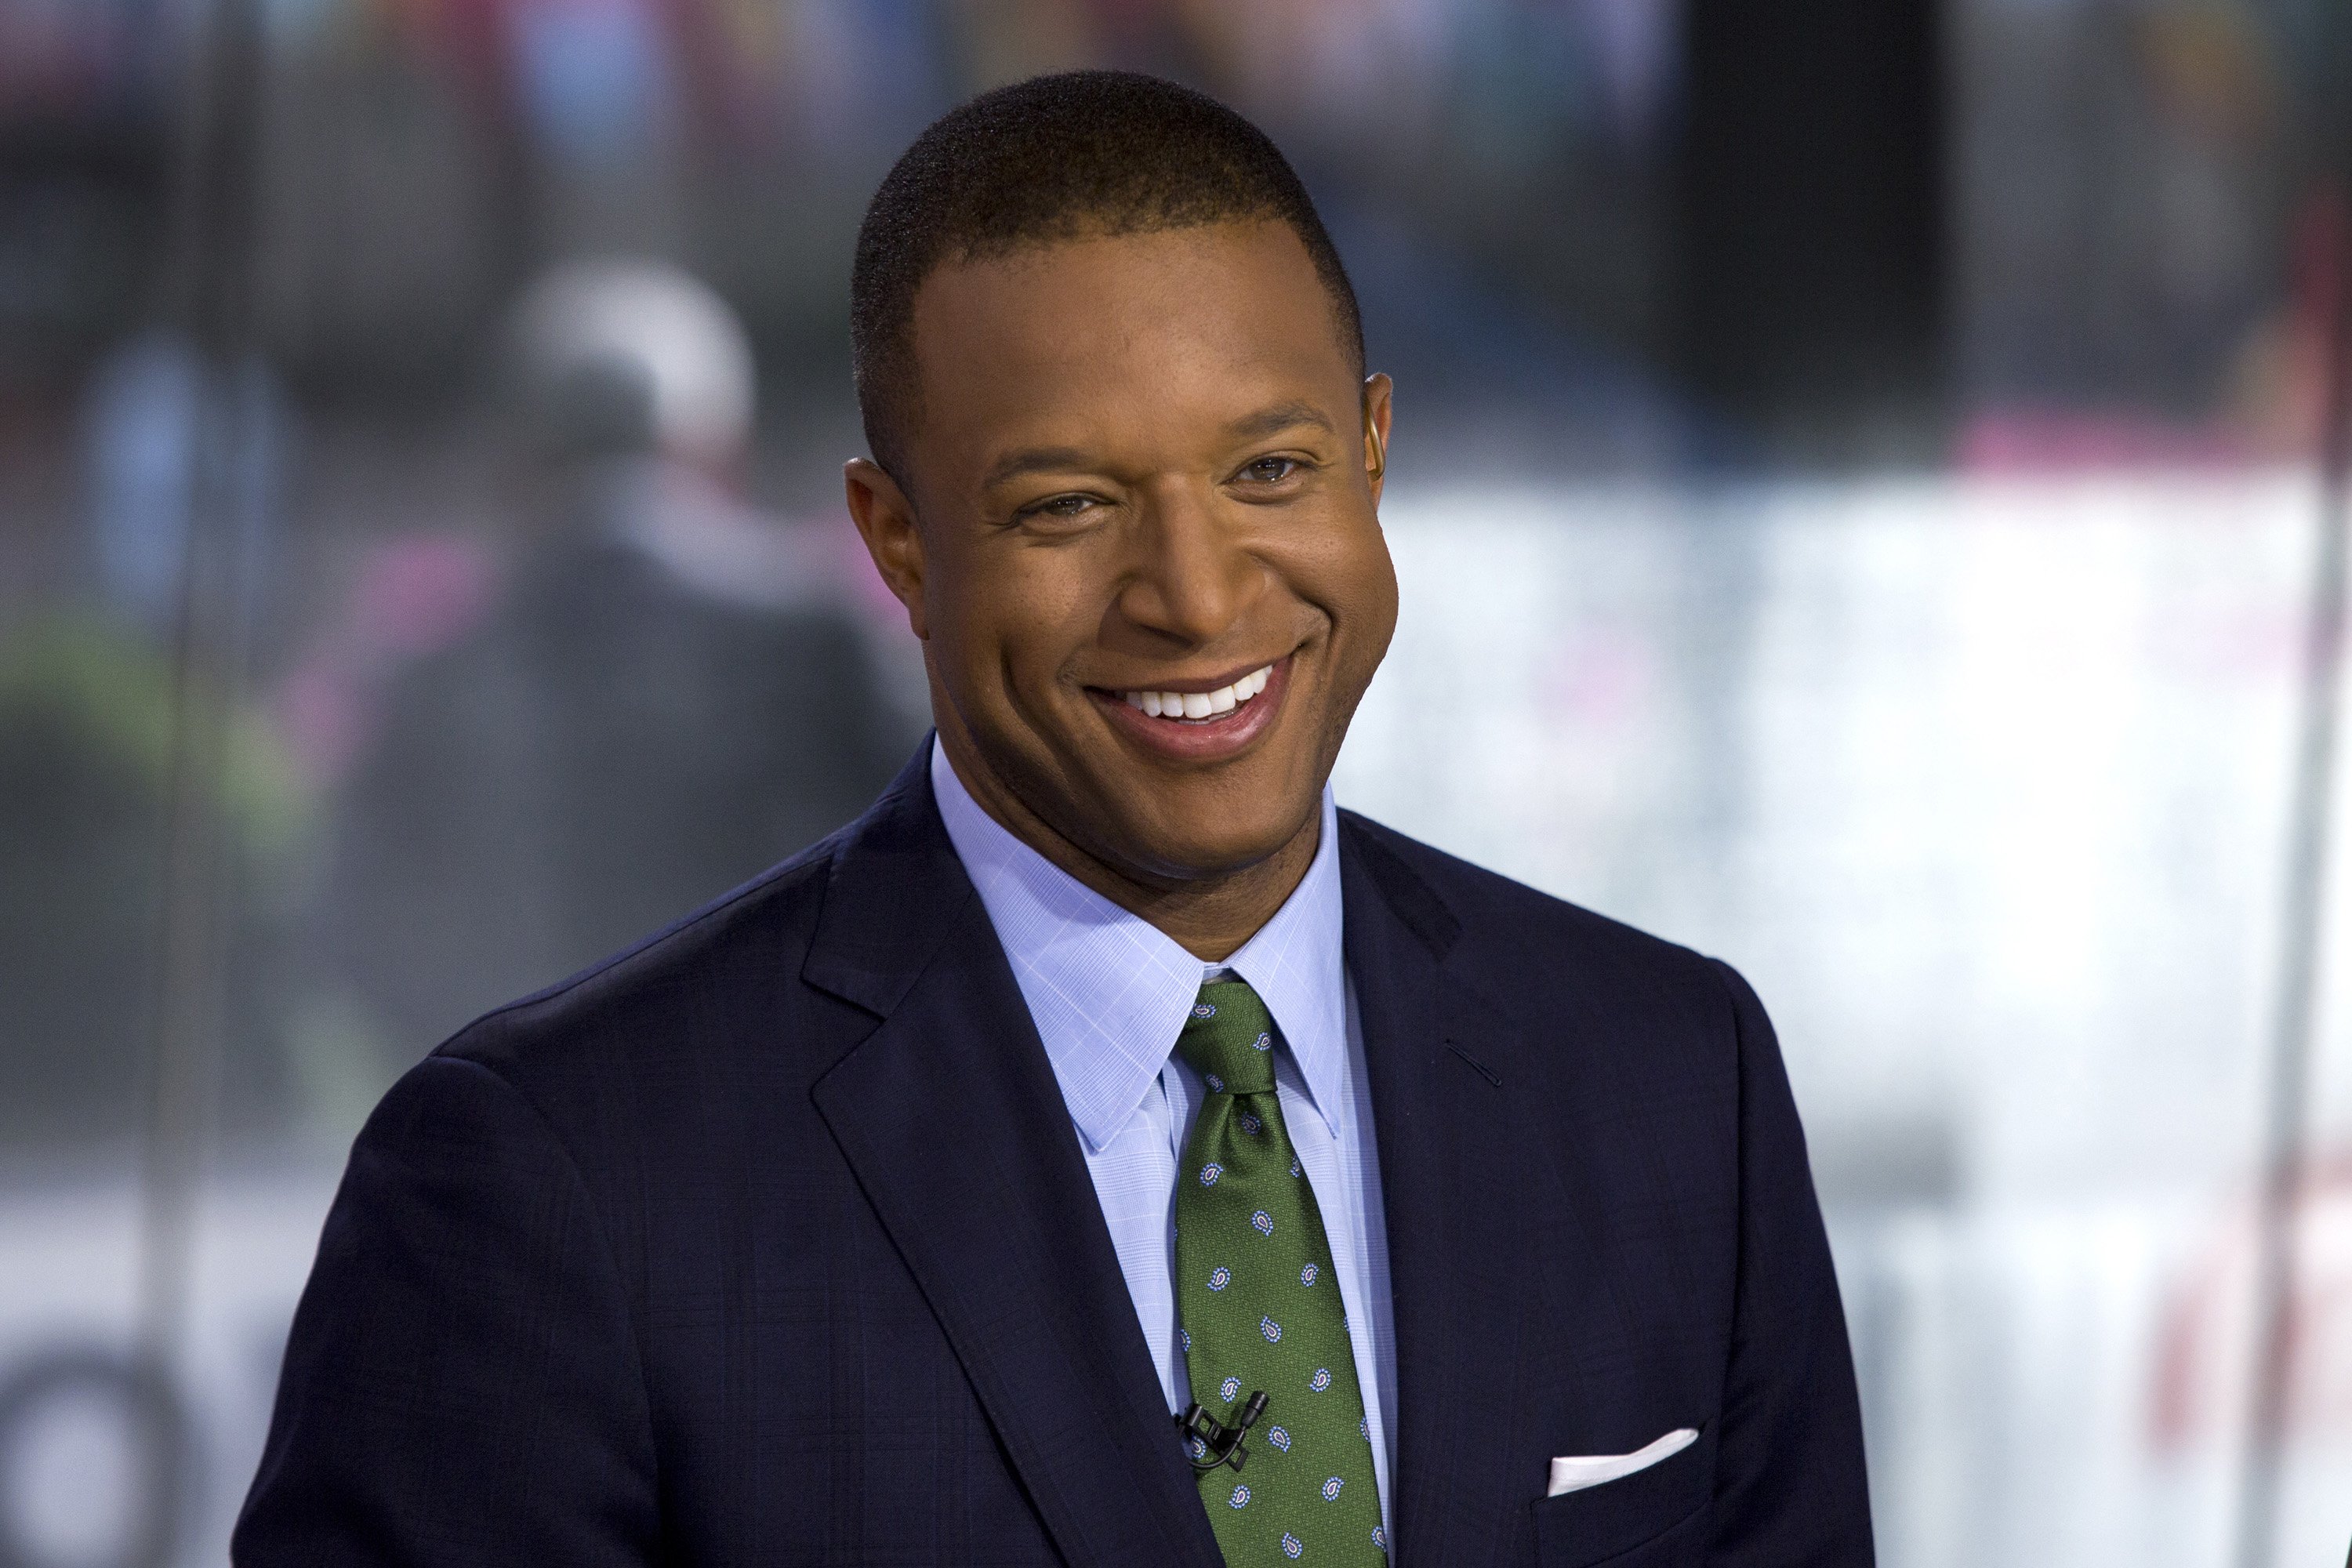 Craig Melvin photographed on NBC in 2018. | Source: Getty Images